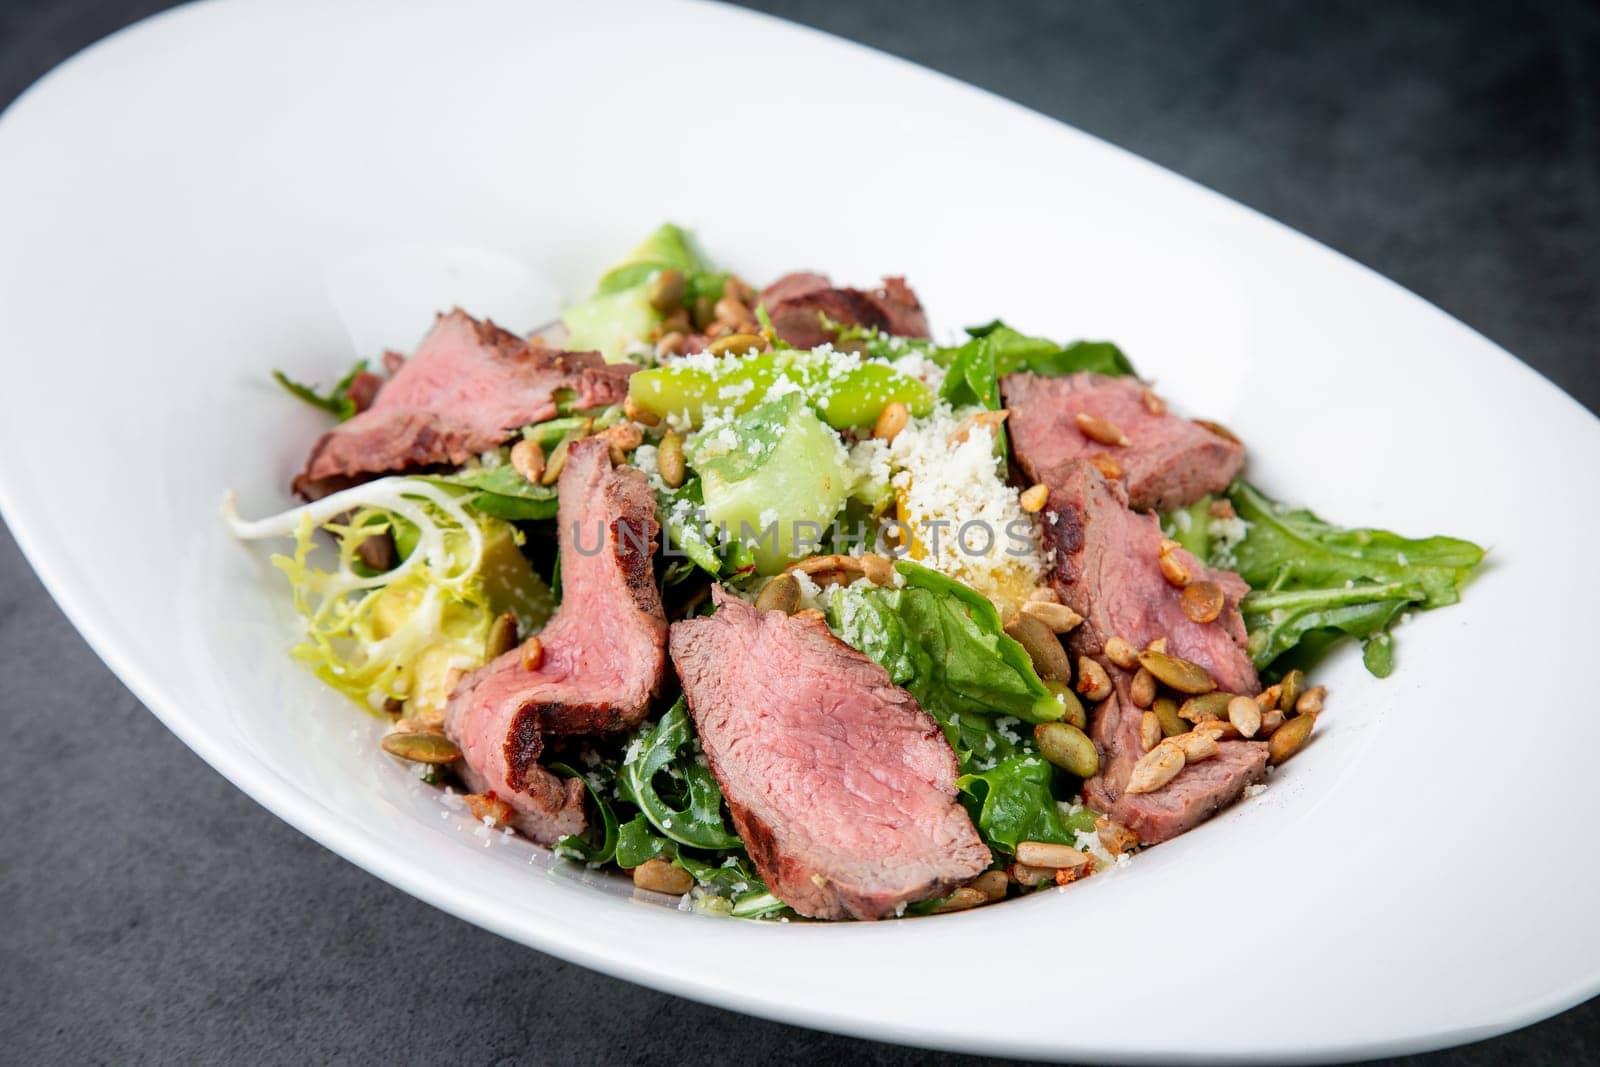 salad with pieces of beef, pistachios, lettuce and cheese. High quality photo